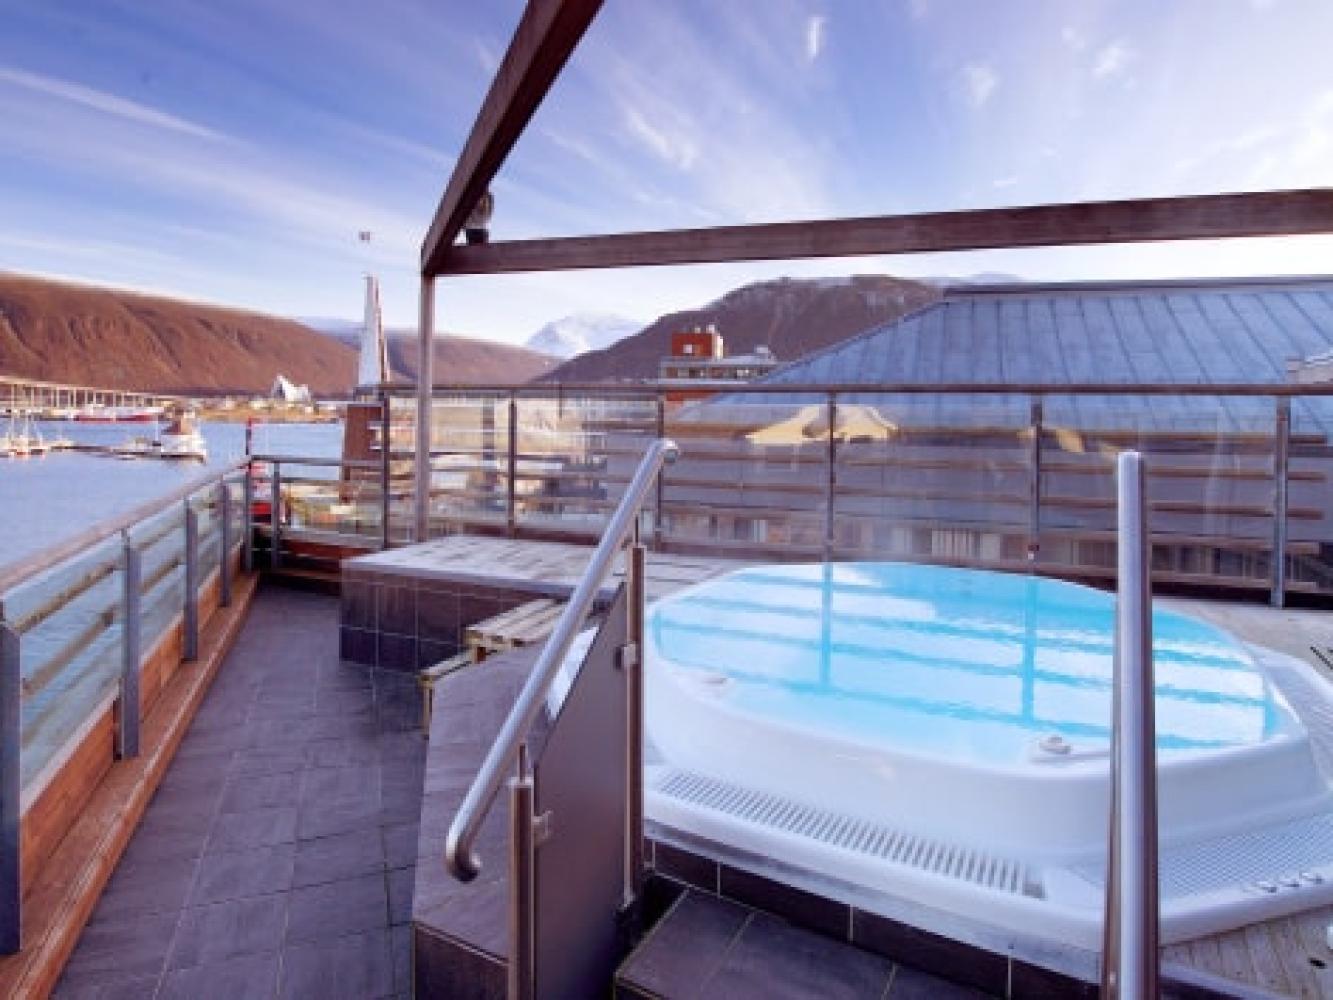 Jacuzzi on the roof of Clarion Collection Hotel Aurora.